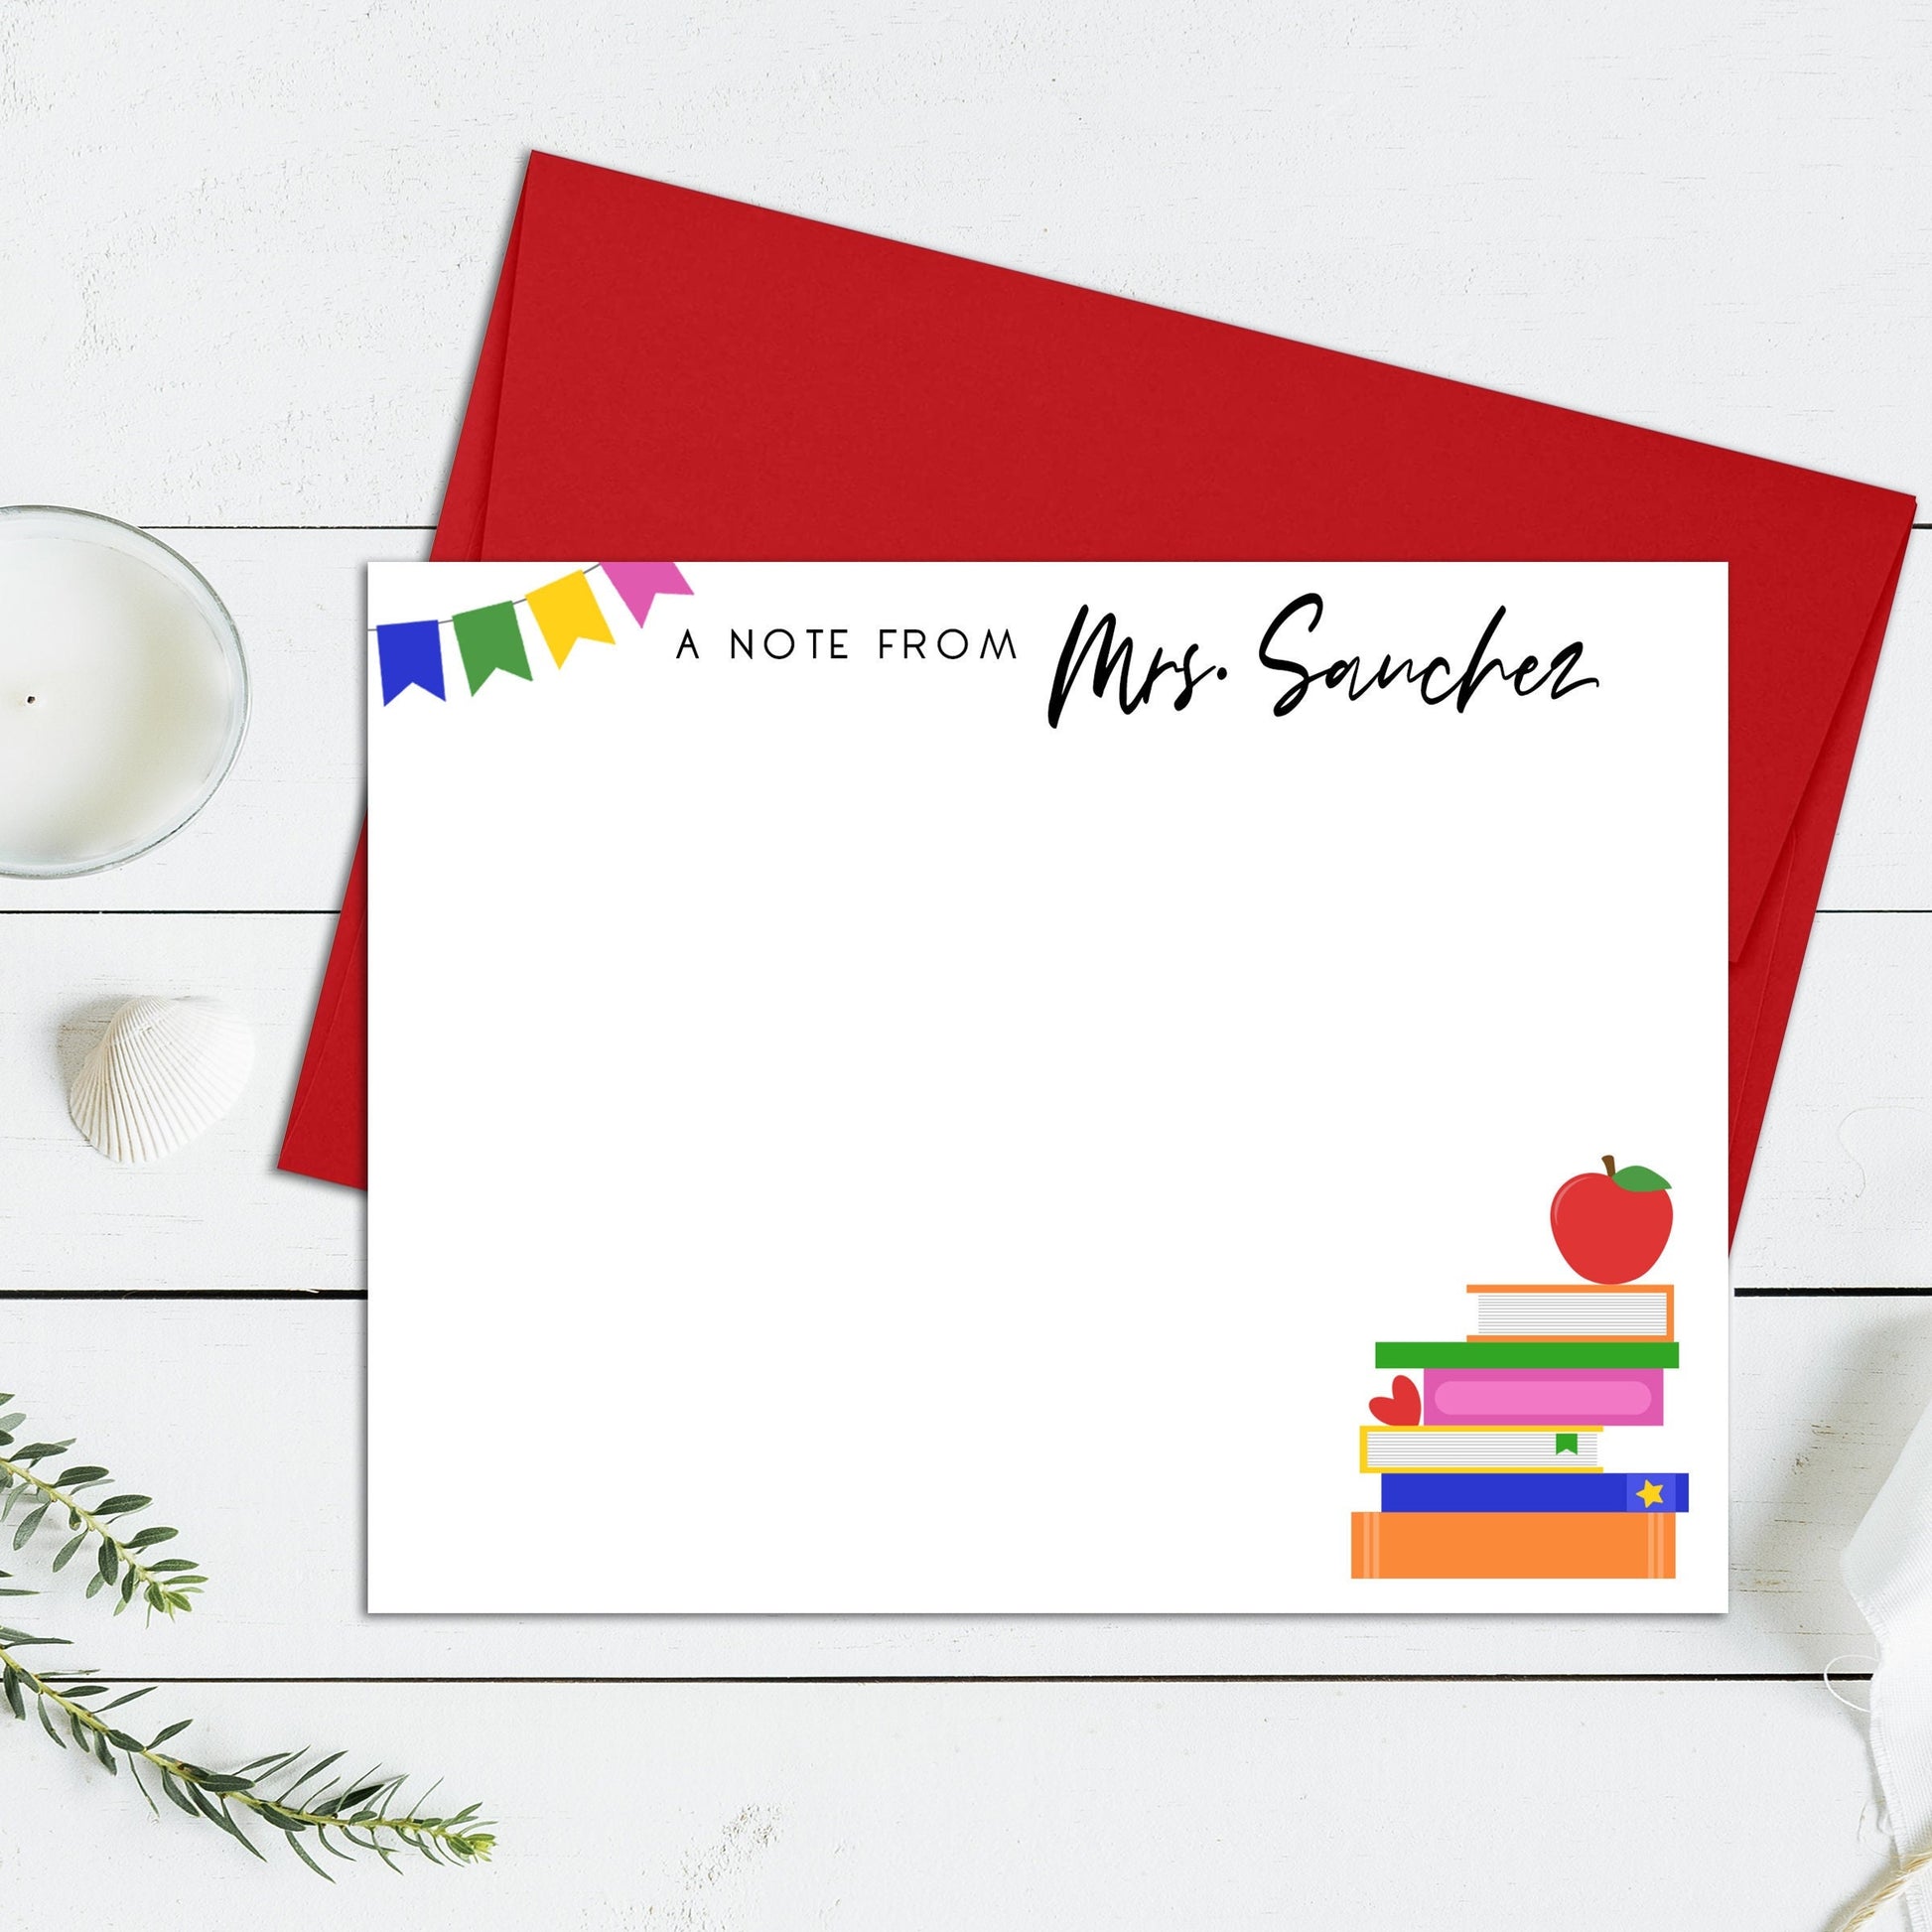  Personalized Stationary, Personalized Stationery Cards